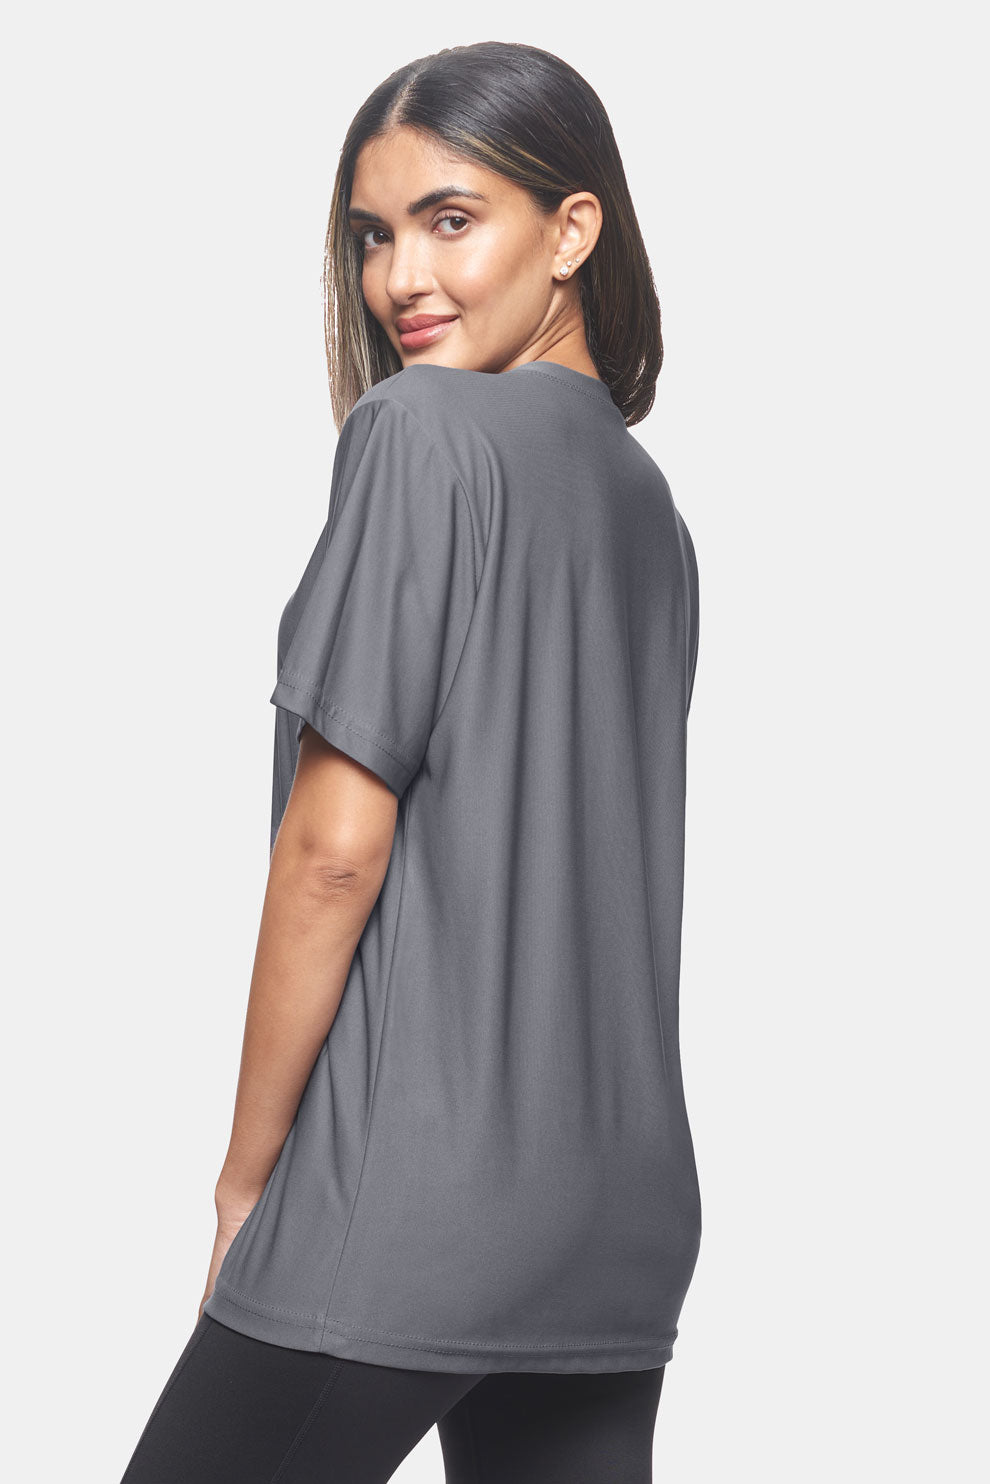 EcoTek Recycled Performance Tee Expert Brand Apparel image 5#color_charcoal